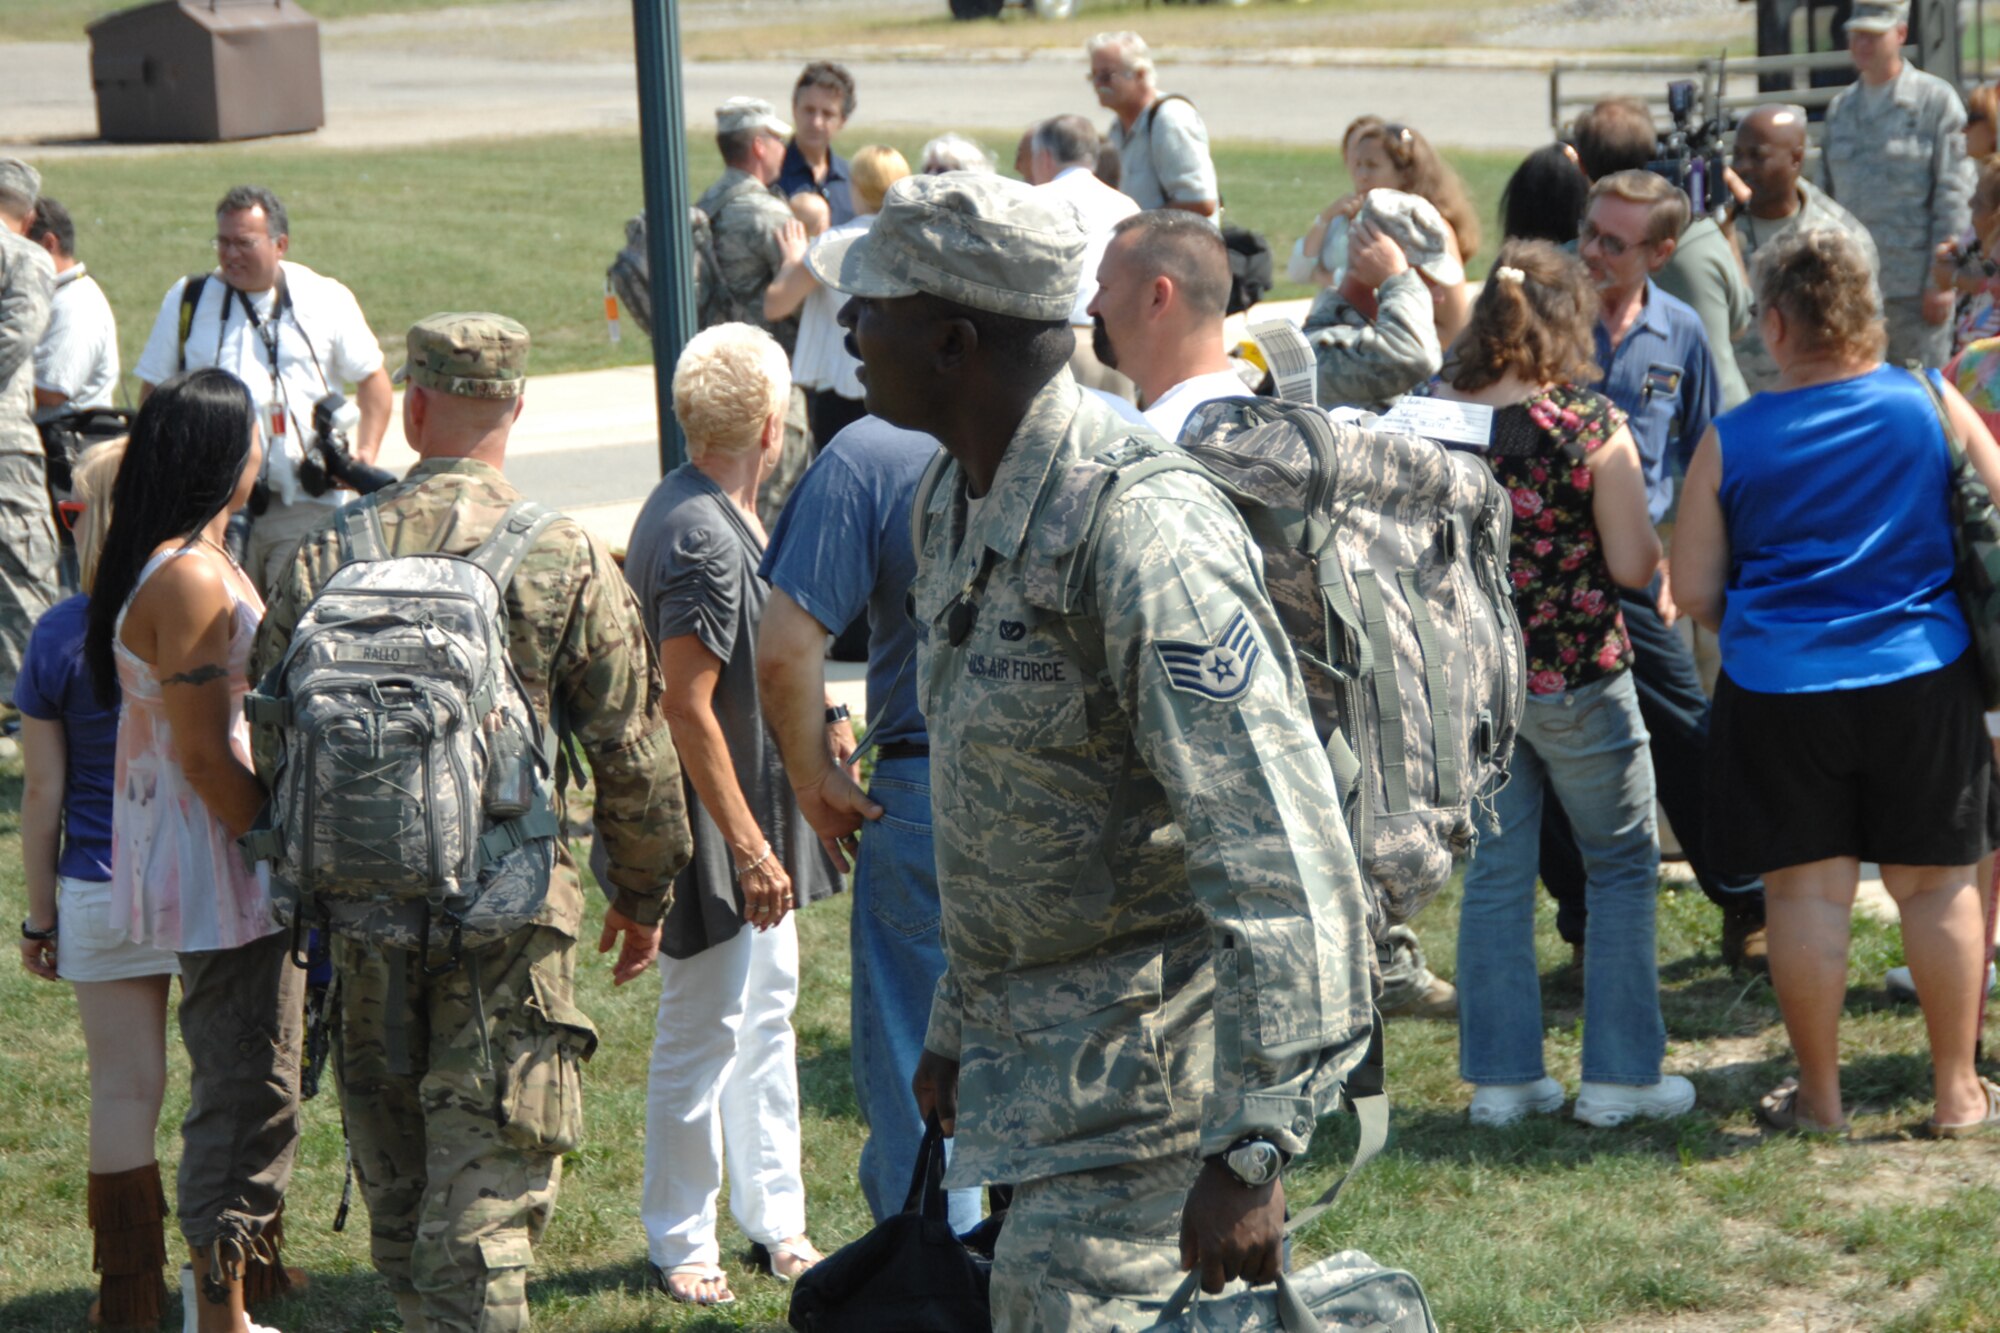 Members of the  127th Civil Engineer Squadron of the Michigan Air National Guard return to their home station at Selfridge Air National Guard Base, Mich., on Sept, 1, 2011, after a six-month deployment in Afghanistan. (USAF photo by SSgt Rachel Barton)